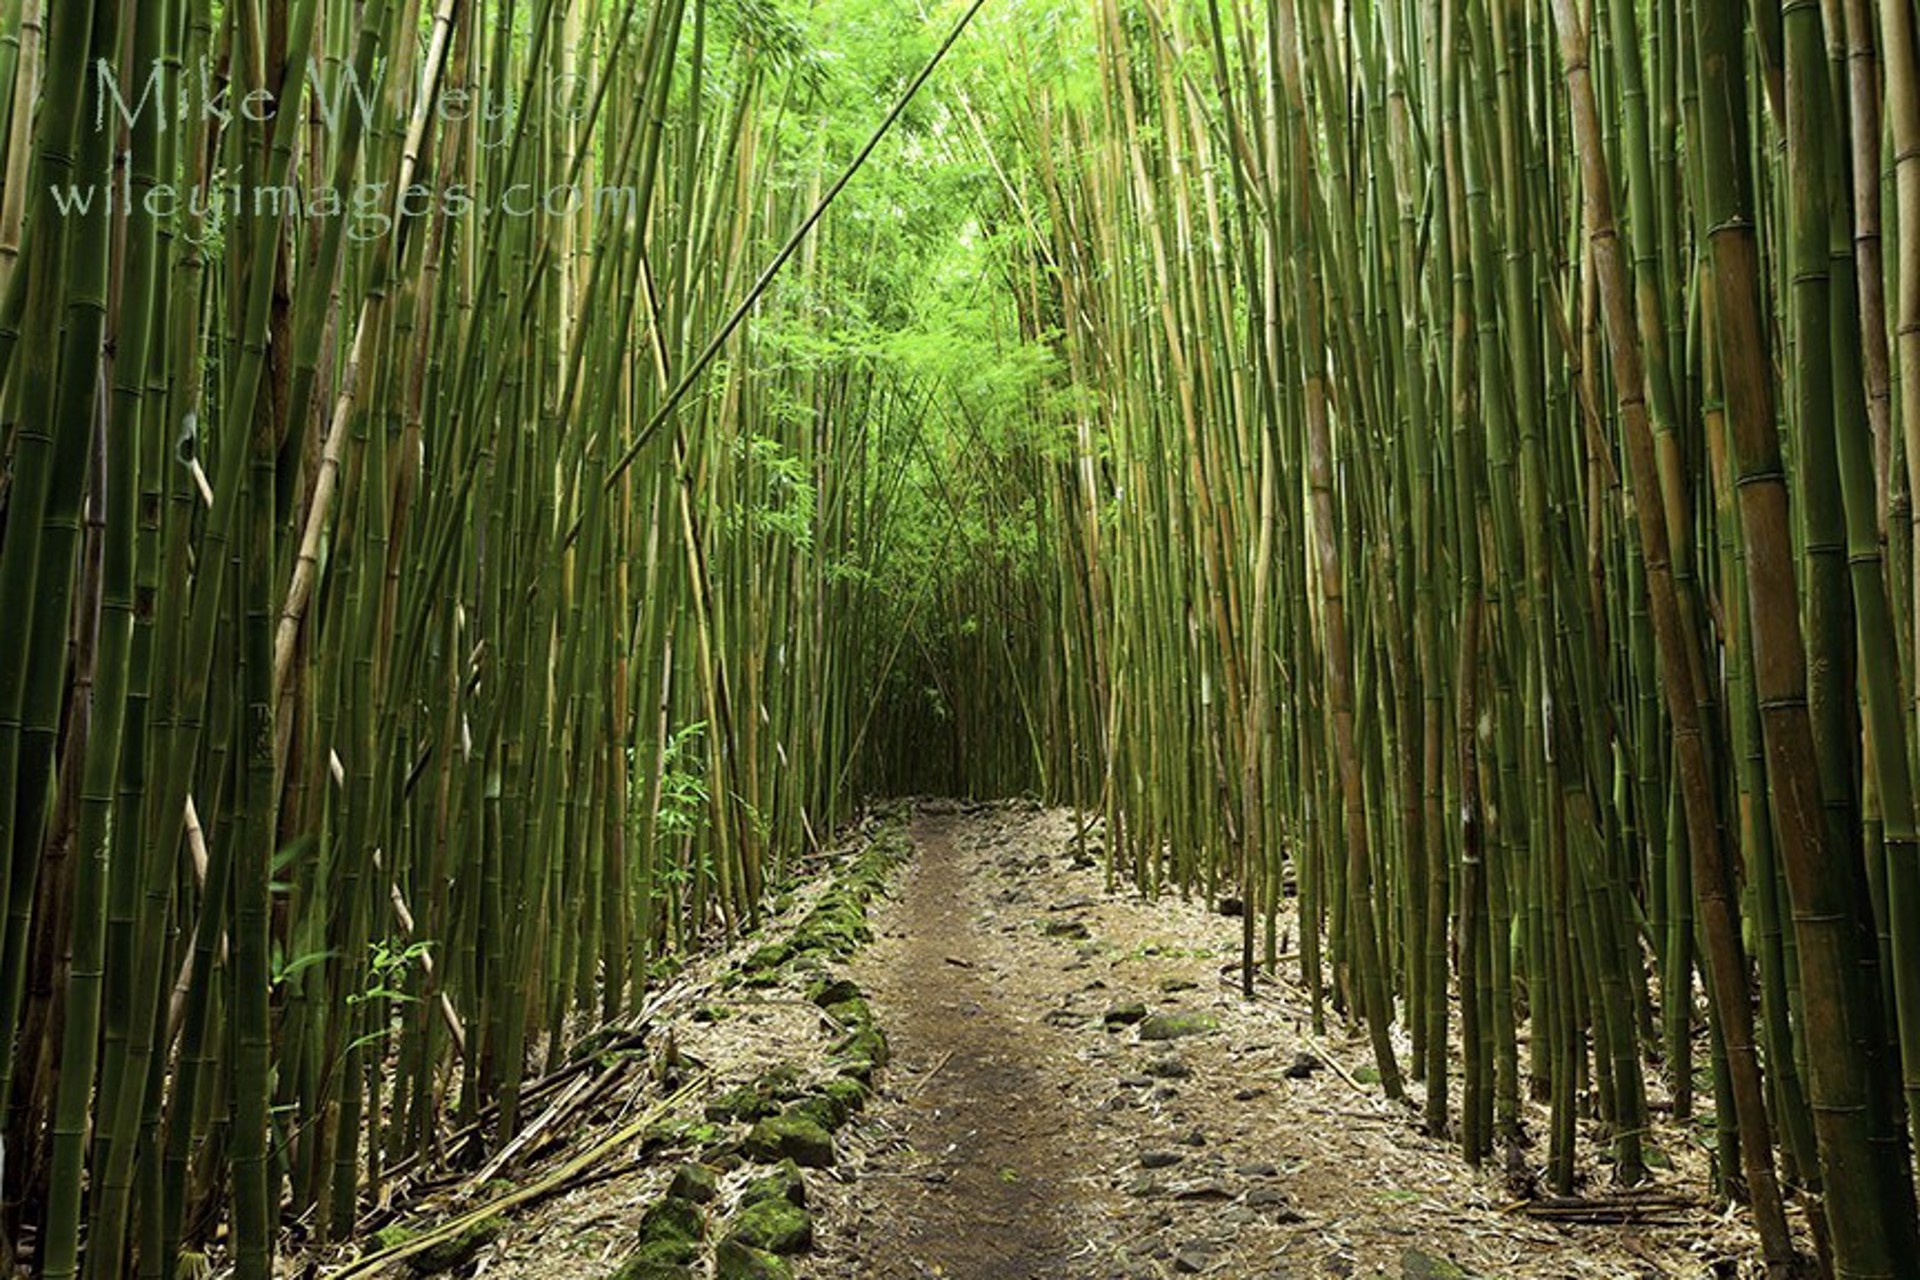 Bamboo Trail Horizontal  by Mike Wiley